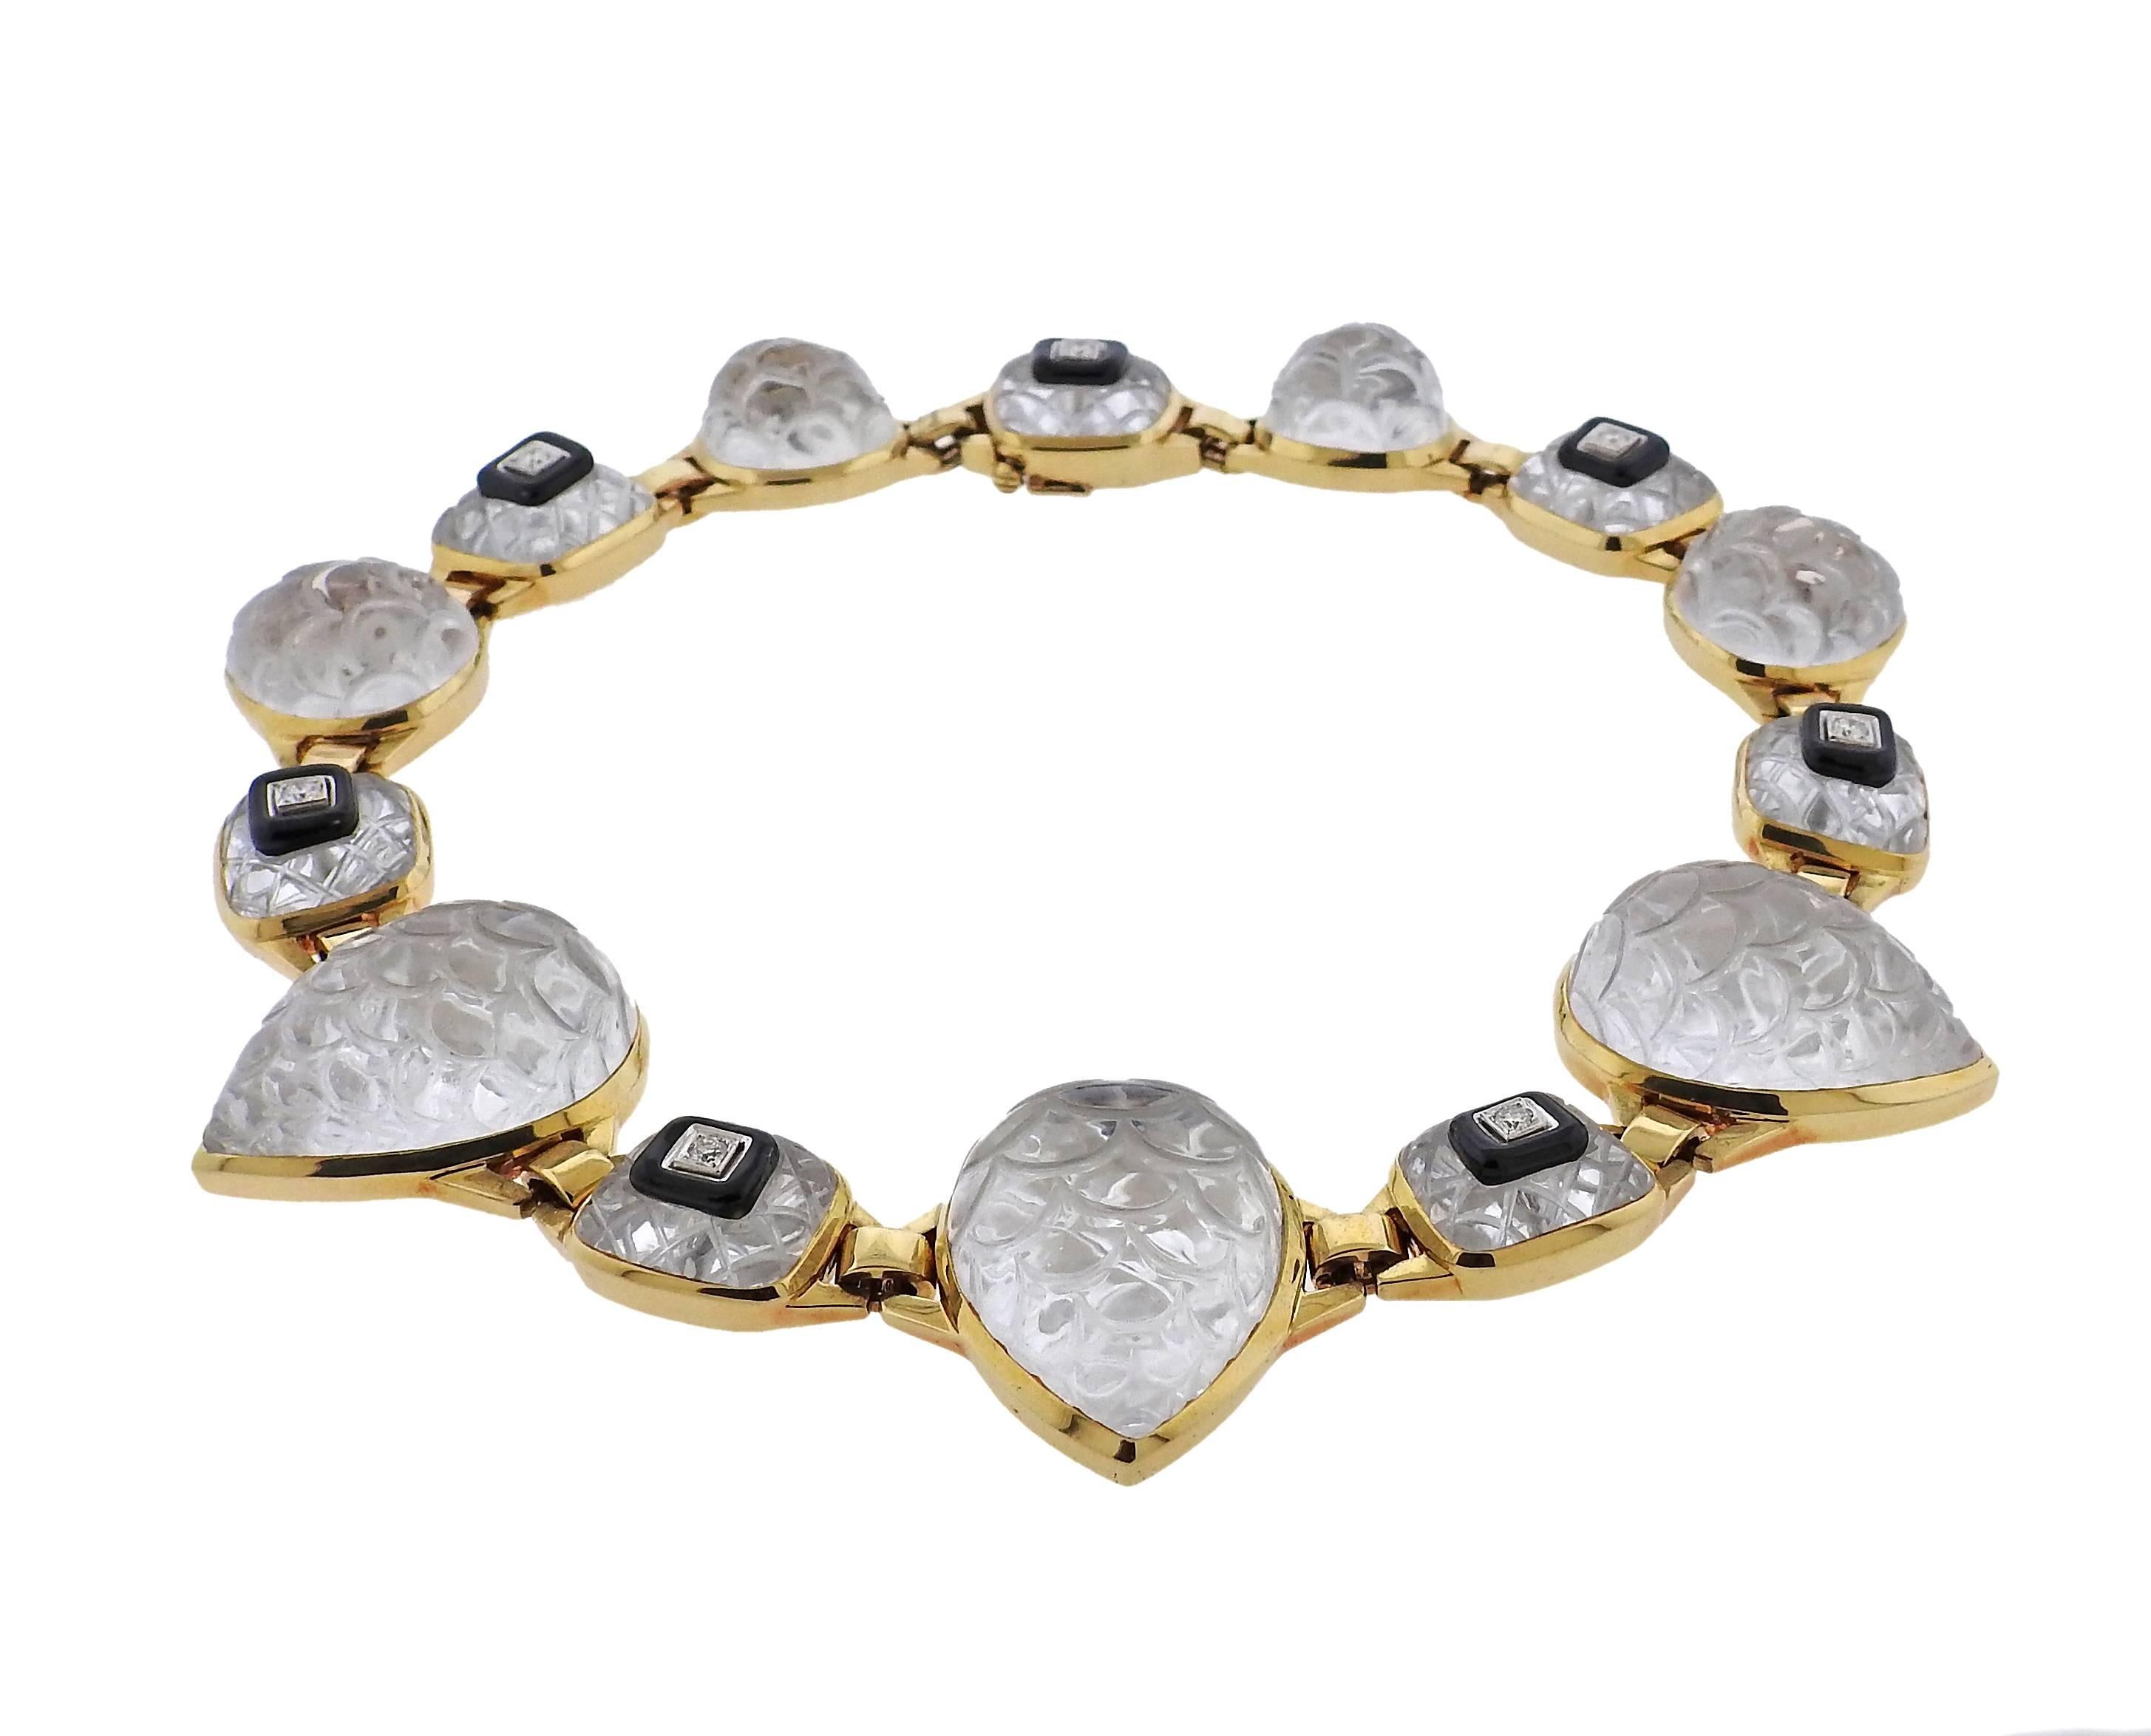 Impressive 18k gold platinum rock crystal onyx diamond necklace. Featuring approximately 0.56ctw of G-H/VS diamonds. Necklace measures 16" long and 35mm at the widest point. Marked Webb 18k plat. Weight is 196.1 grams. 